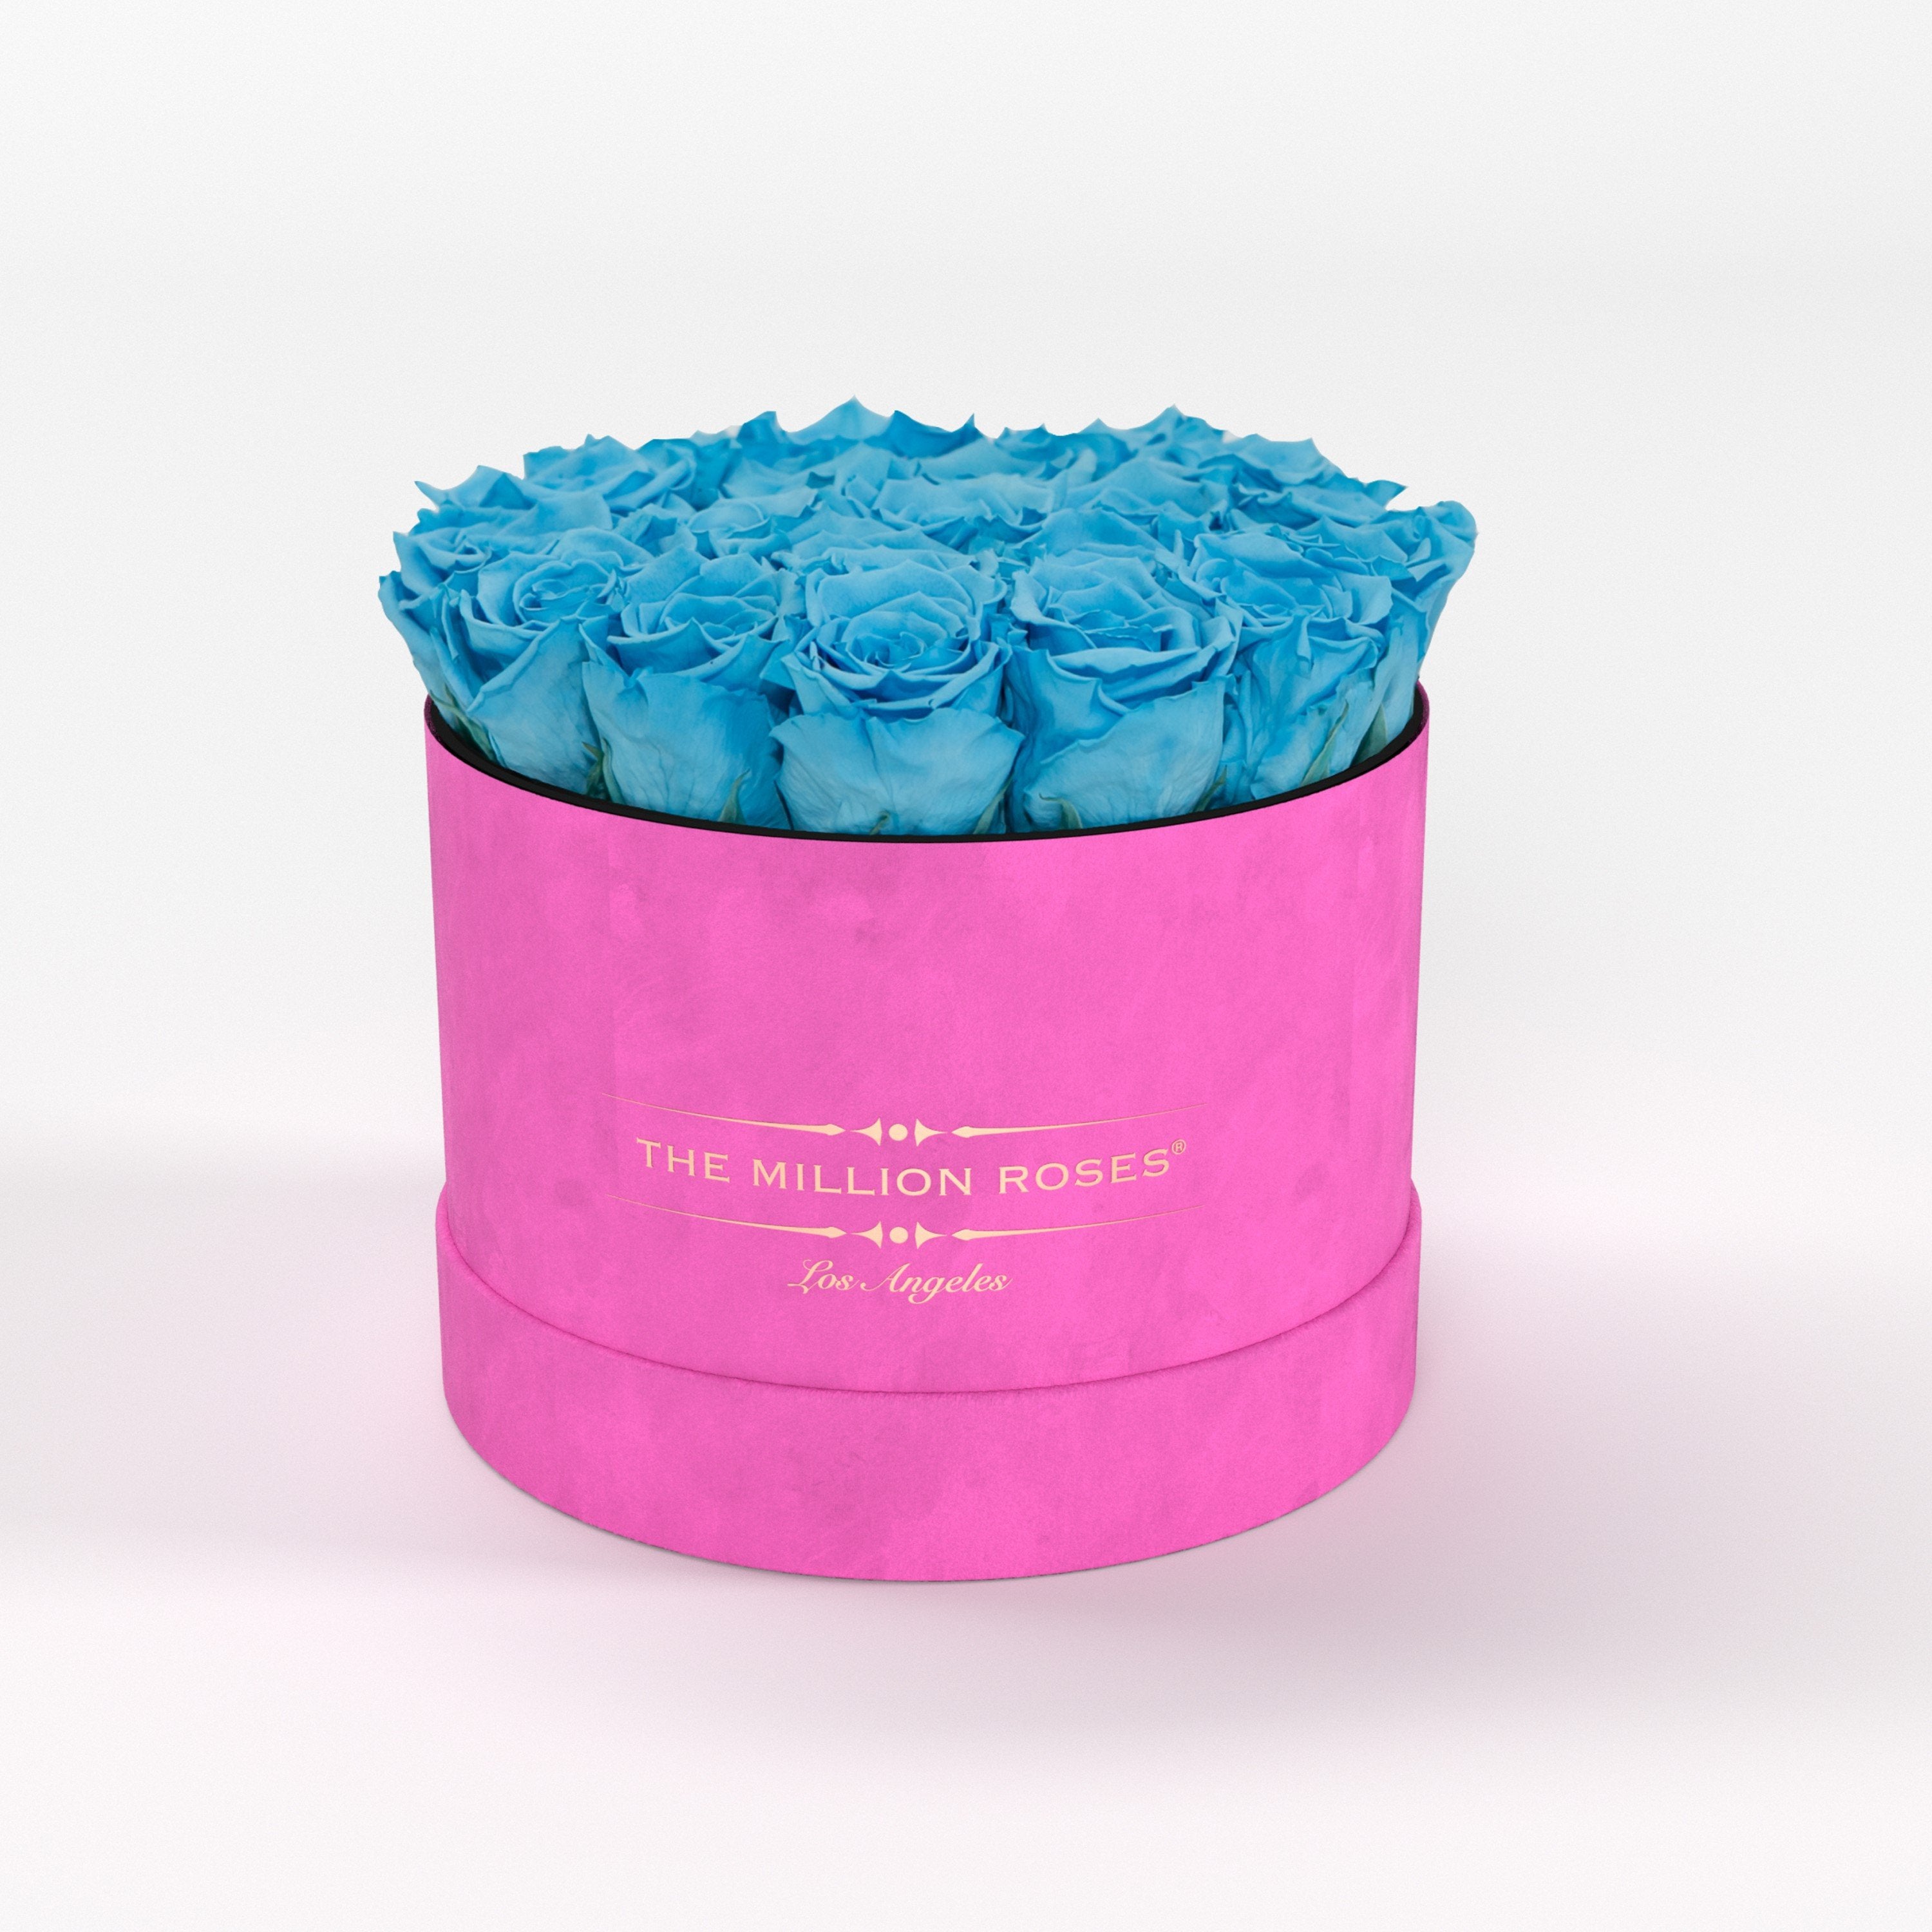 ( LA ) Hot Pink - Suede - Classic Box with Light Blue Roses Kit - the million roses